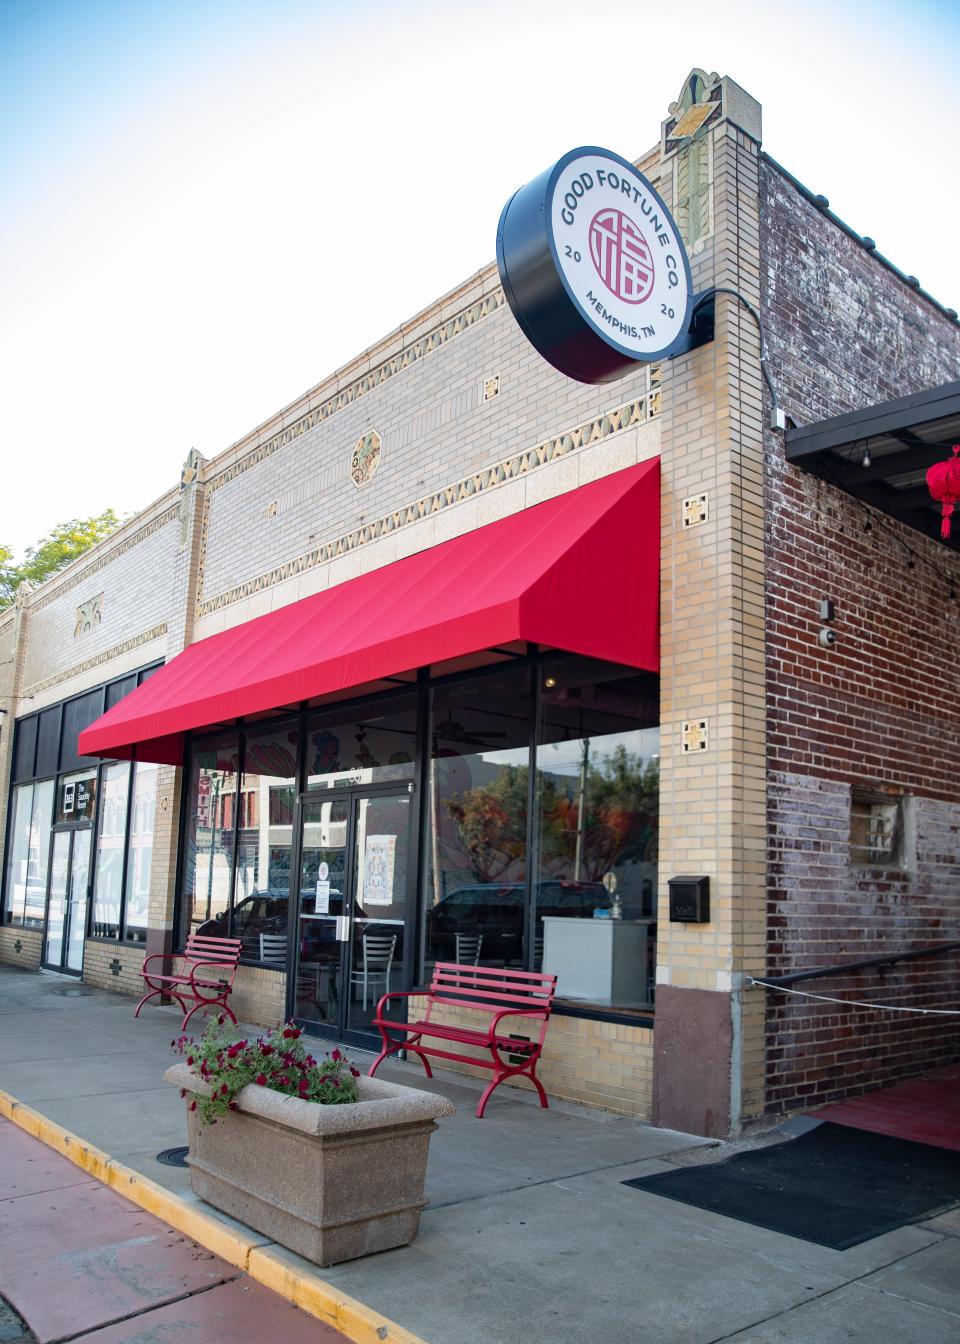 Good Fortune Co. will be the 15th Memphis restaurant to be featured by Guy Fieri on "Diners, Drive-Ins and Dives."